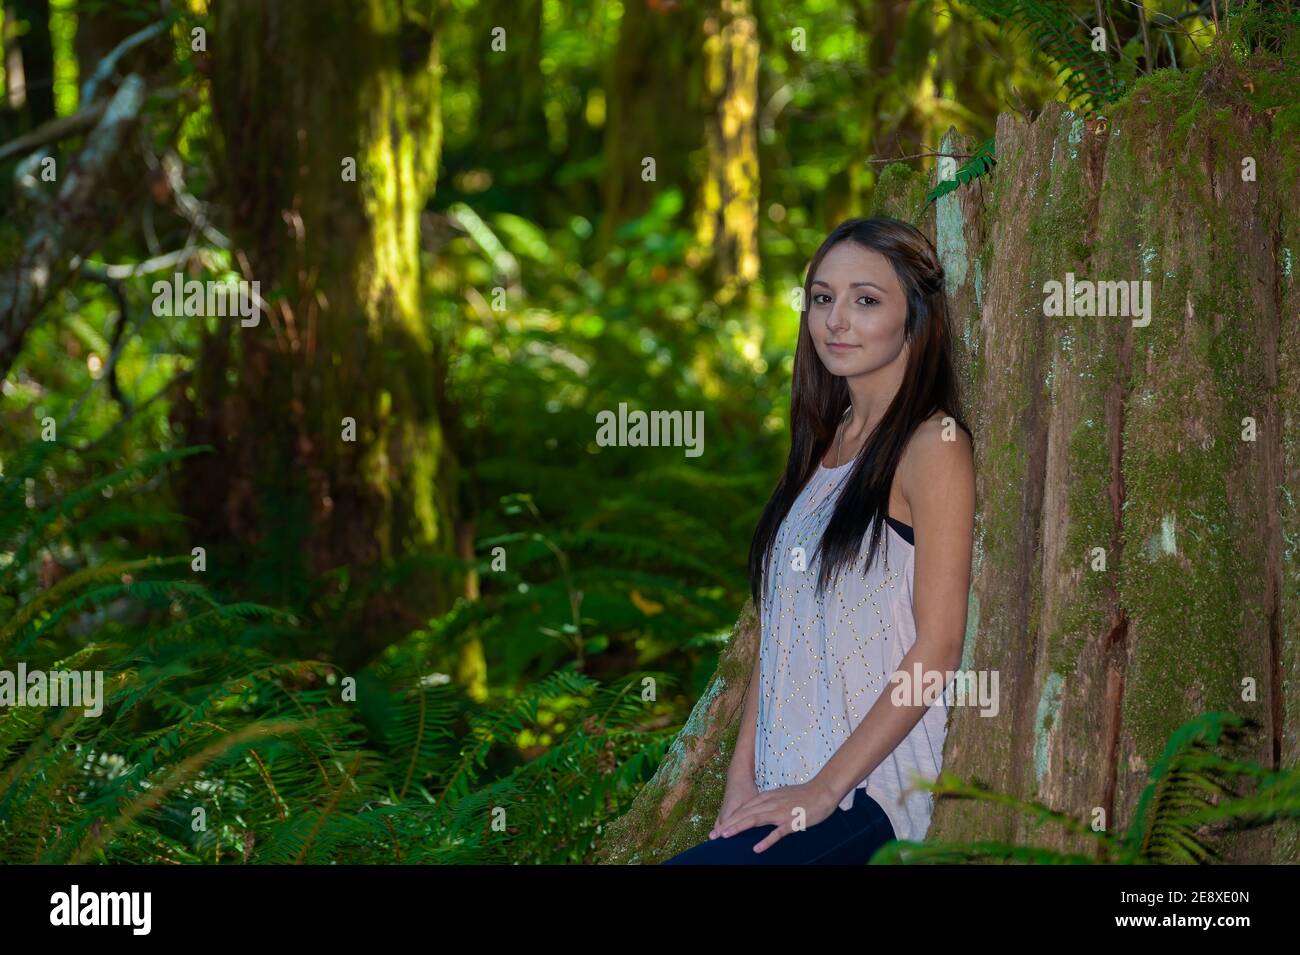 A young woman with long brown hair leans against a tree in a forest setting. Stock Photo